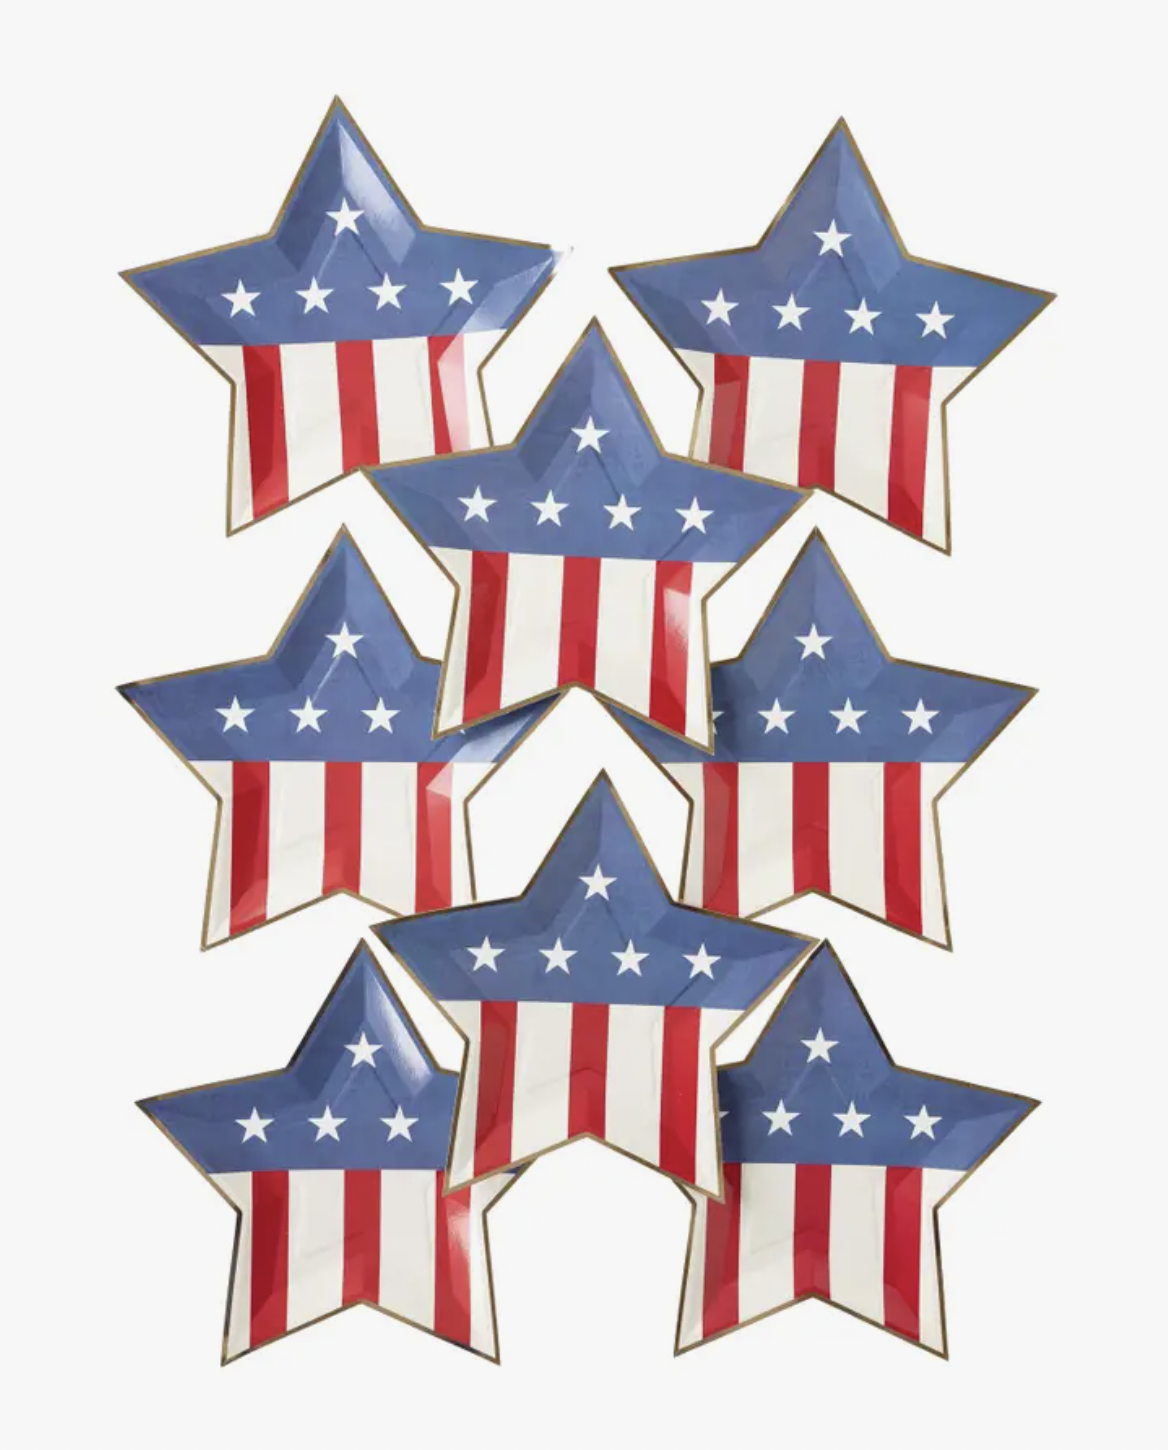 Denim and Stripes Star Shaped Paper Plates